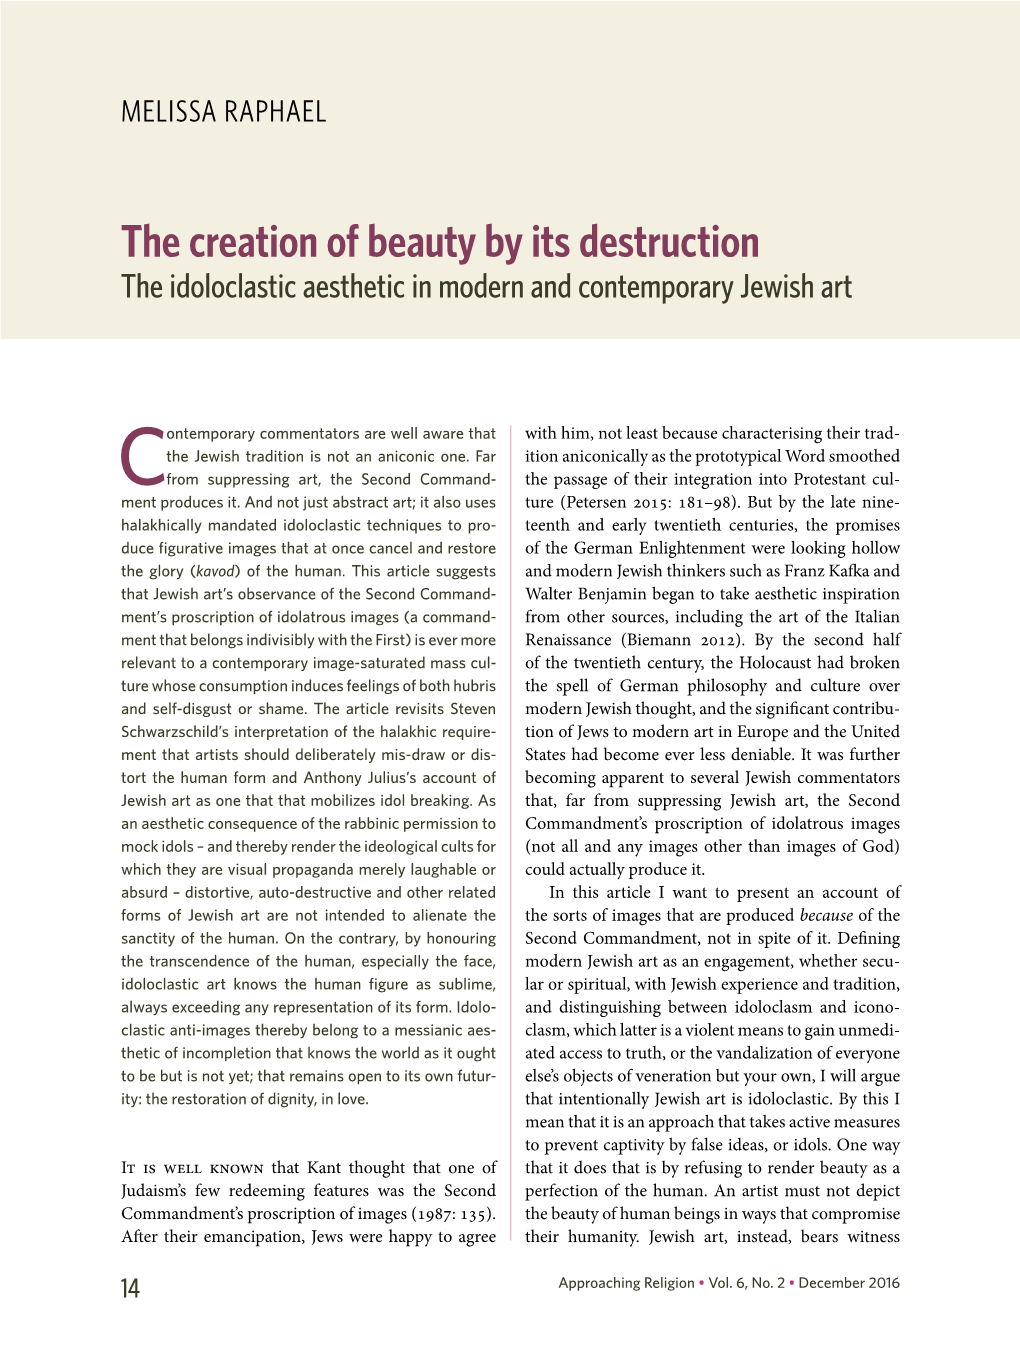 The Creation of Beauty by Its Destruction the Idoloclastic Aesthetic in Modern and Contemporary Jewish Art